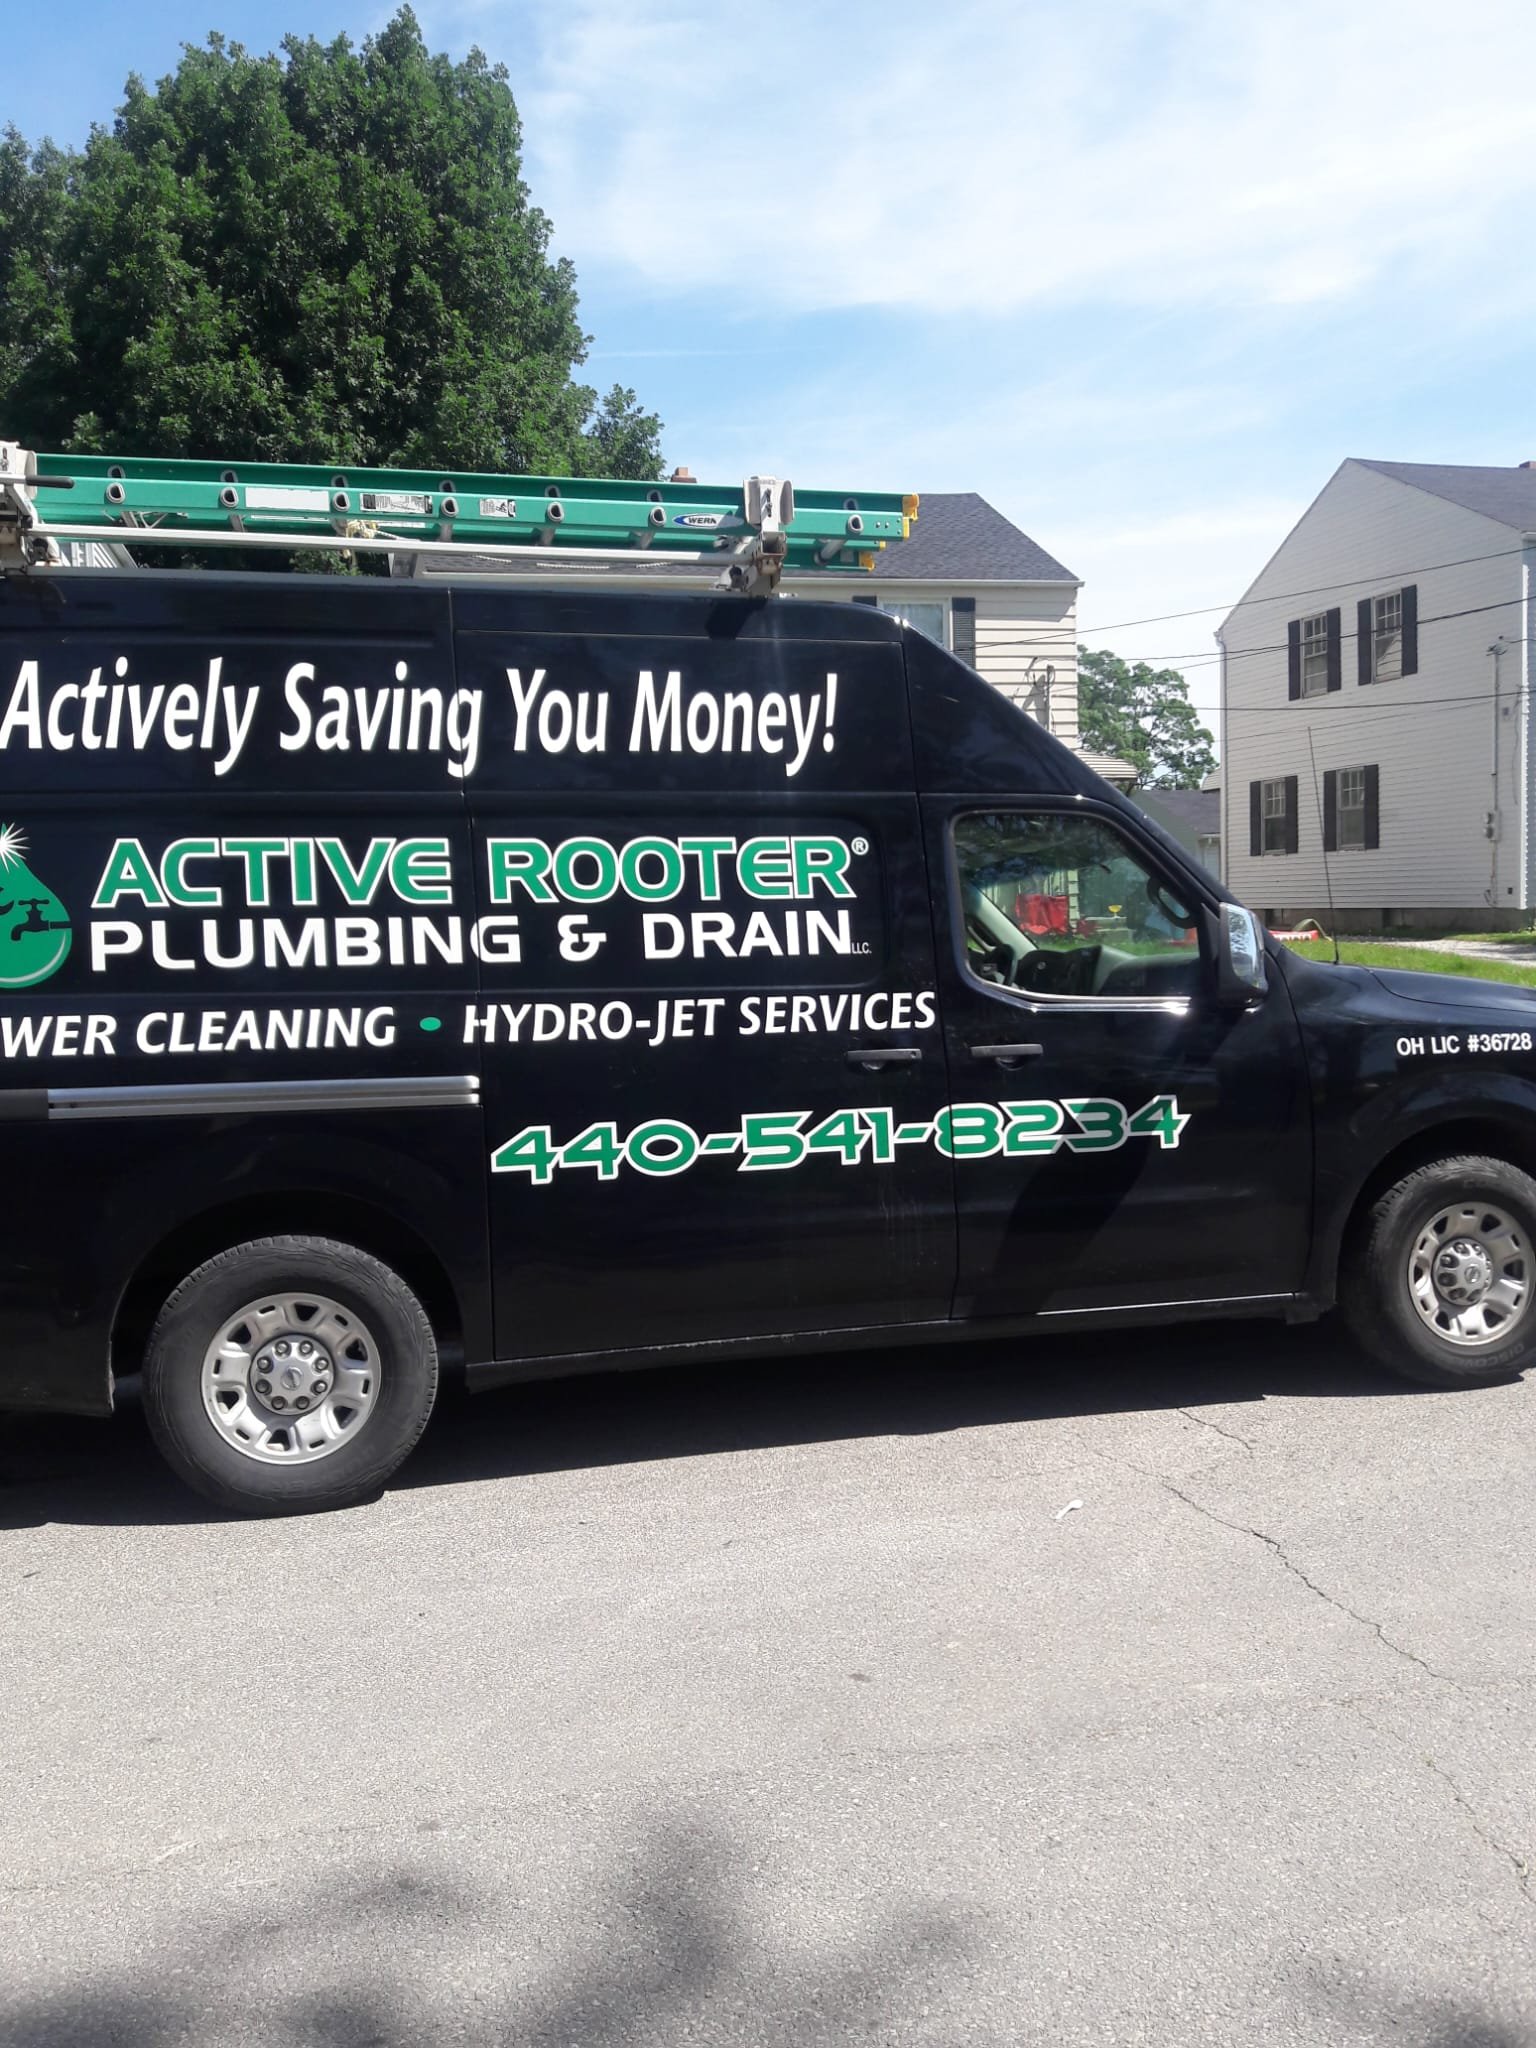 What Are the Benefits of Professional Sewer Drain Cleaning in Elyria?